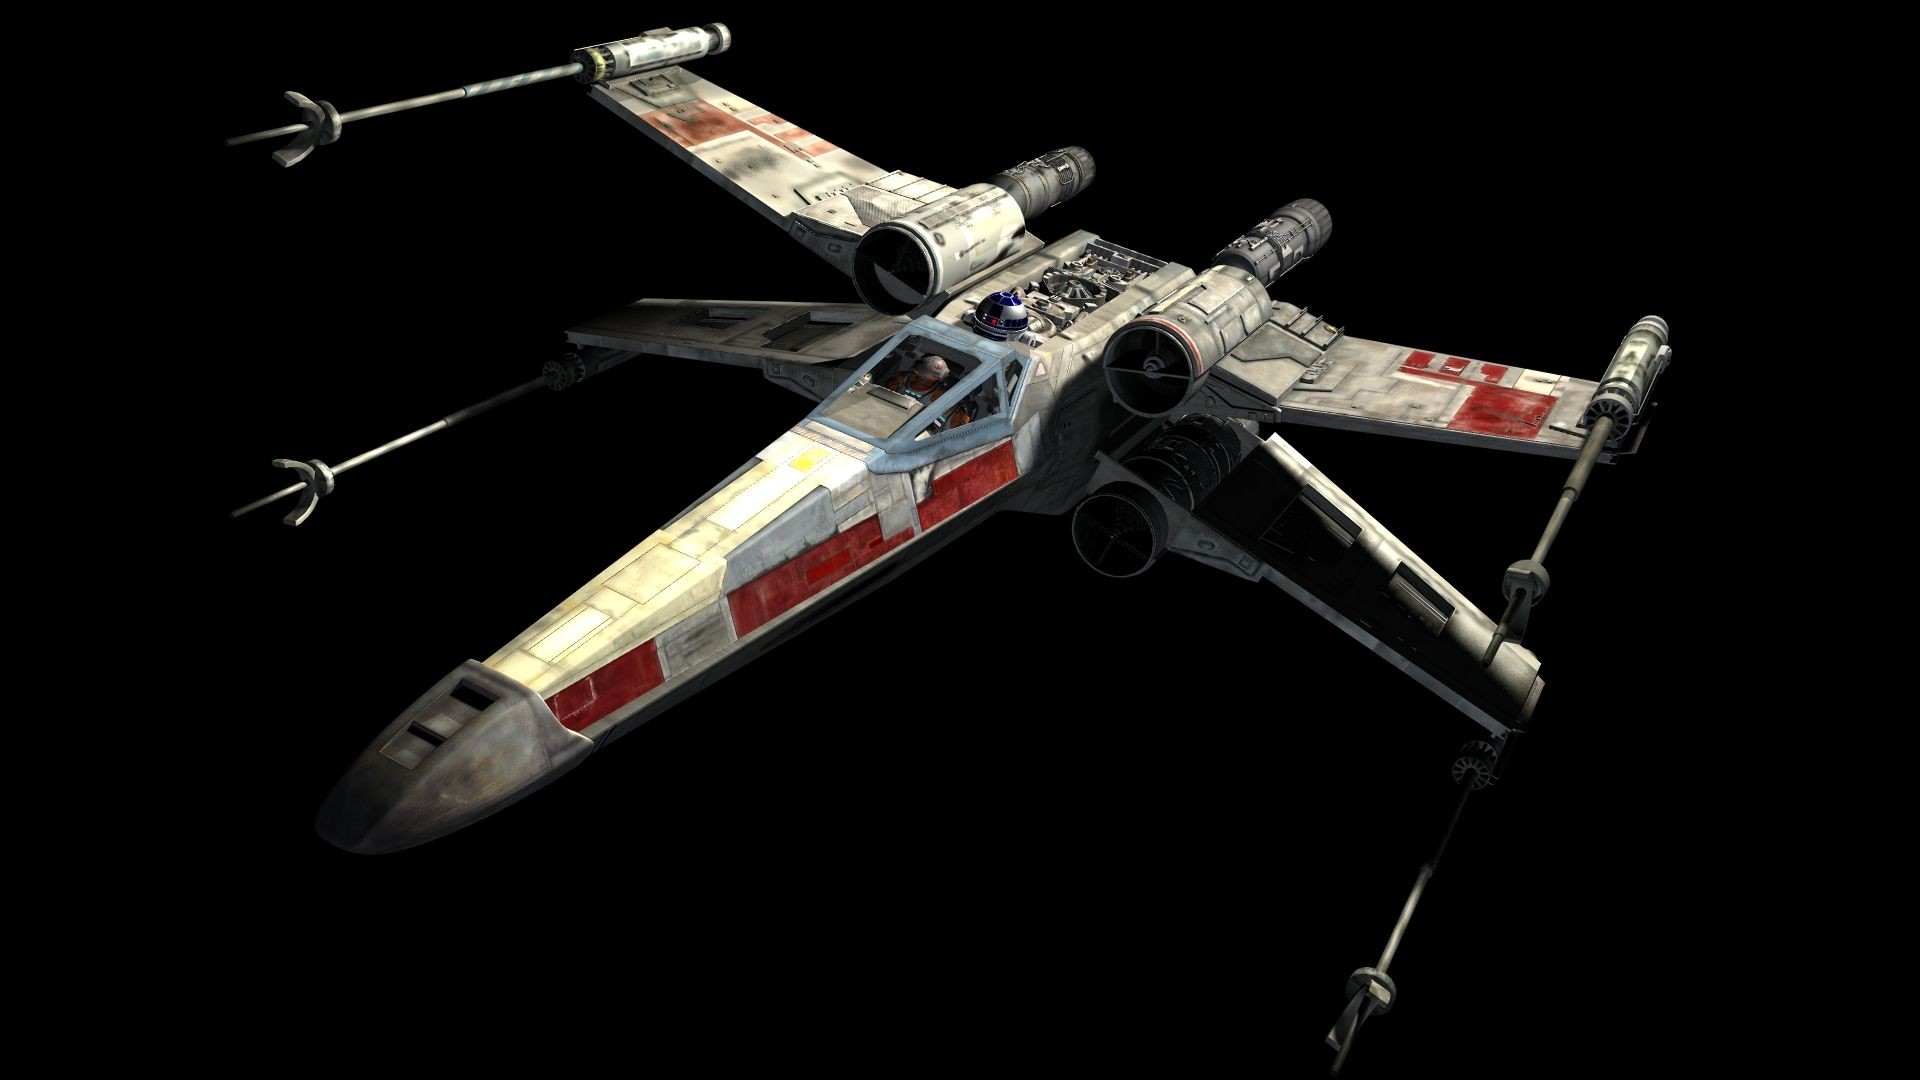 General 1920x1080 X-wing science fiction R2-D2 space movies black background digital art CGI simple background Star Wars Ships